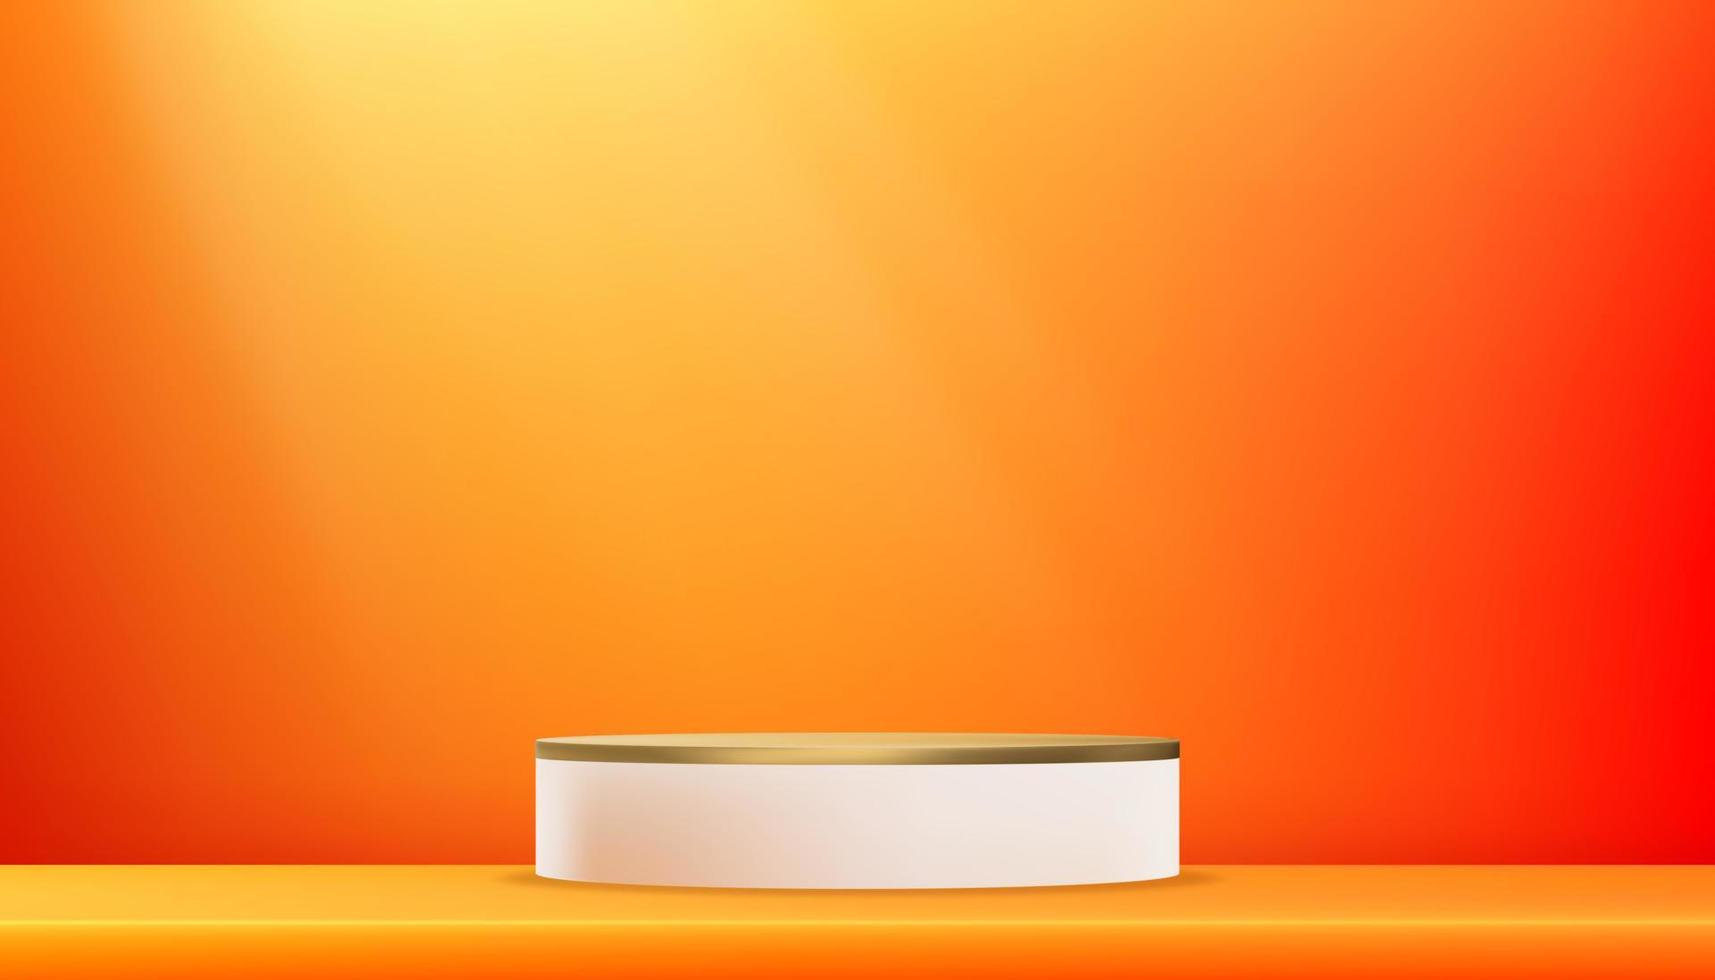 Studio room display with podium stand on Orange wall background,Vector 3D cylinder in gallery room,Minimal illustration showcase for Product presentation for sales for Autumn, Fall vector